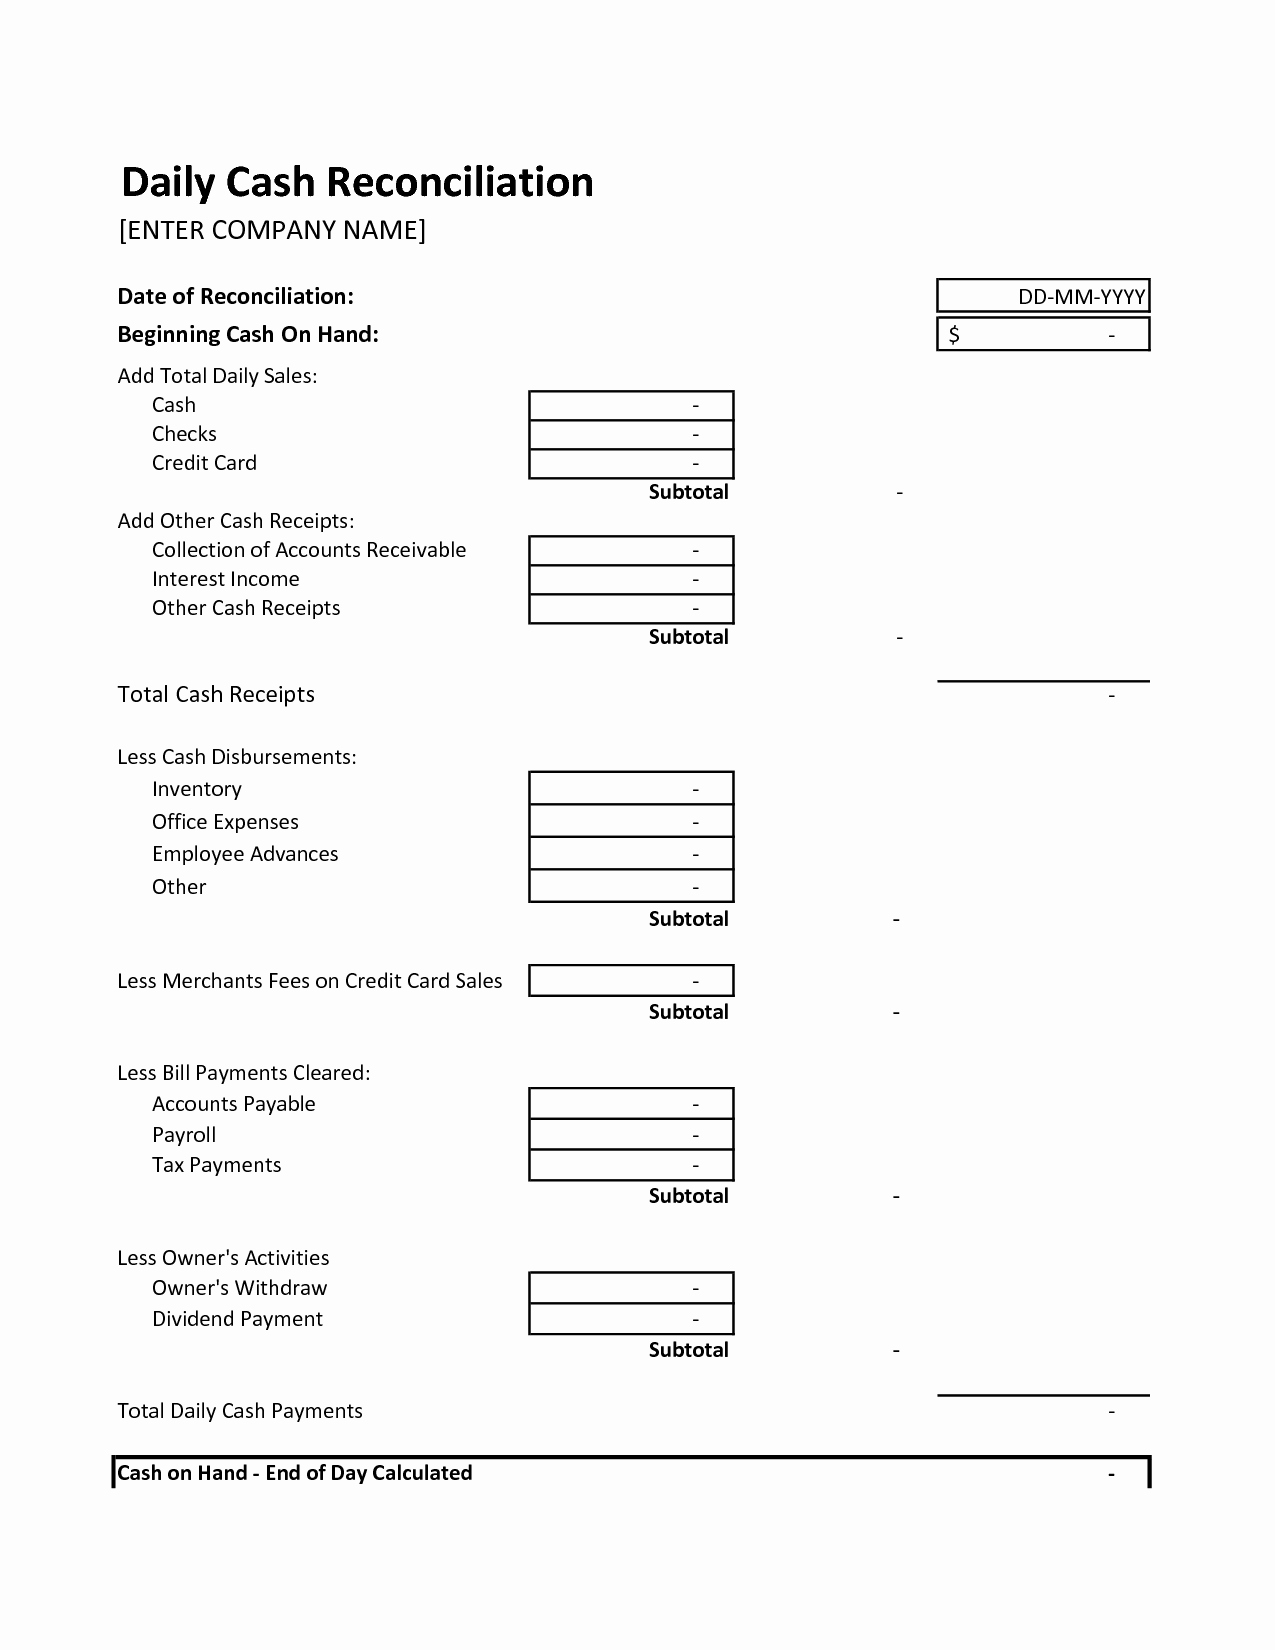 Daily Cash Report Template Beautiful End Day Cash Register Report Template